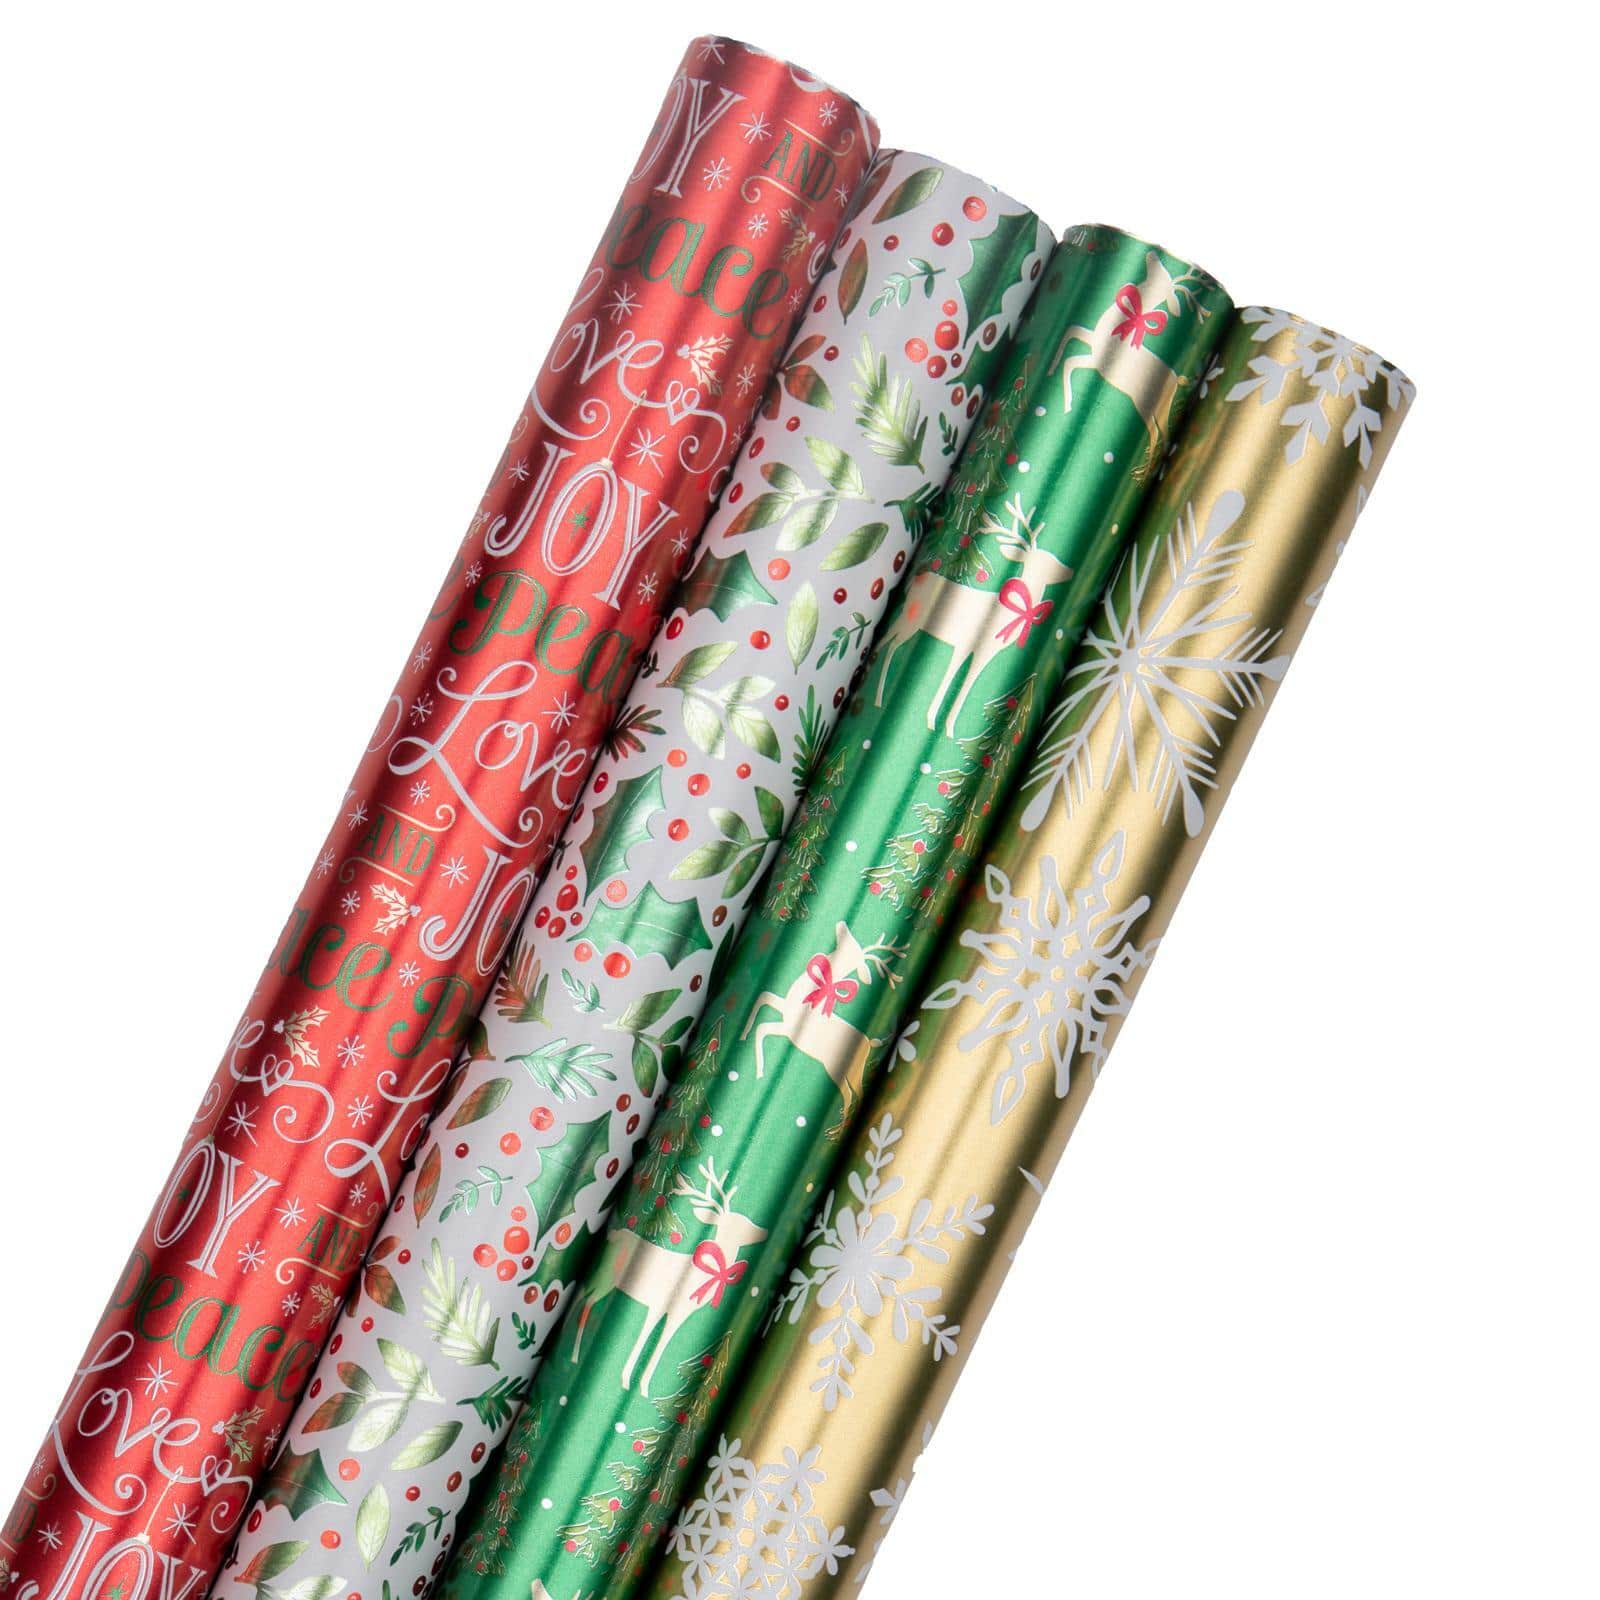 Holographic Lights Christmas Gift Wrap 1/4 Ream 208 ft x 30 in